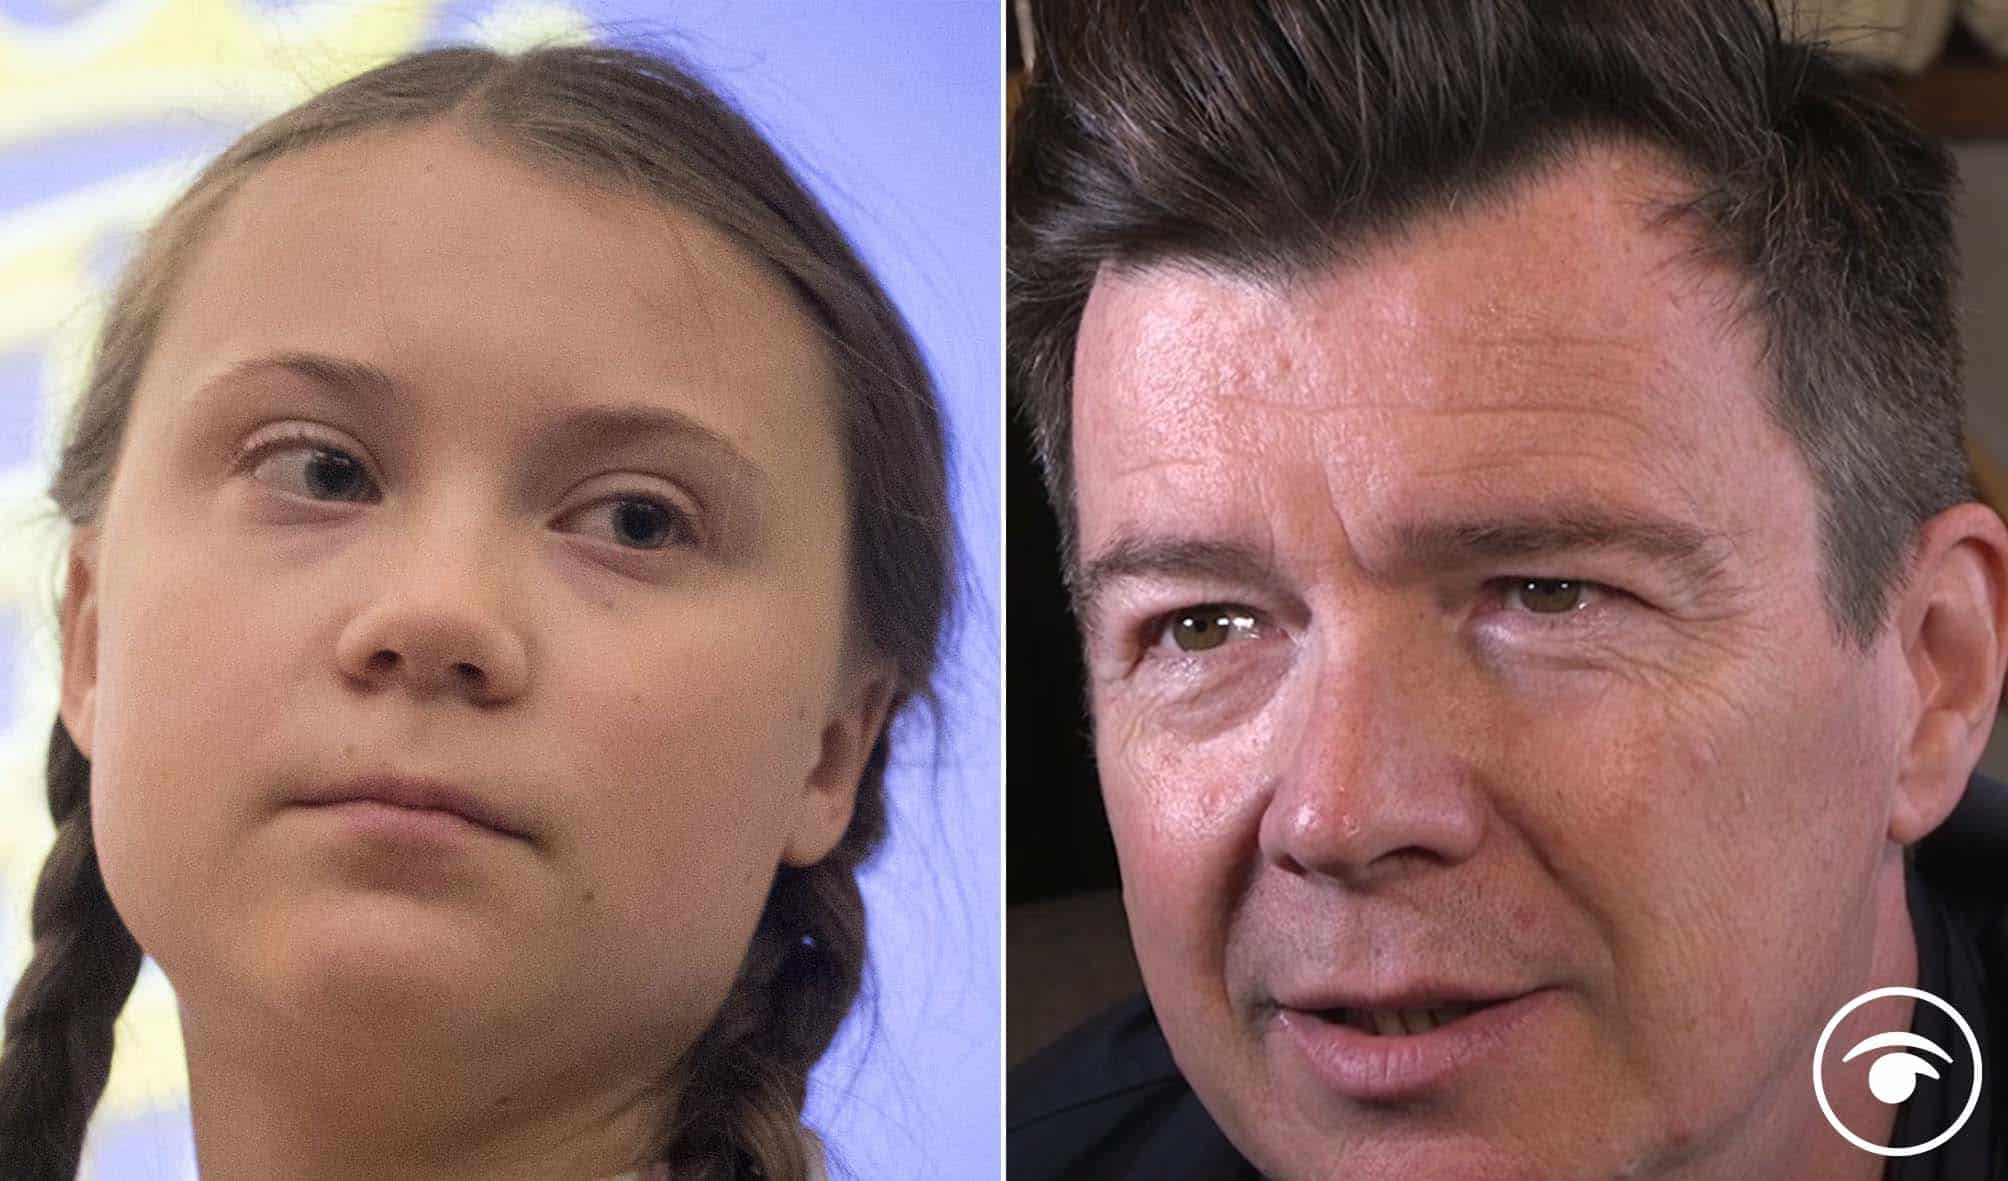 Watch: Greta Thunberg Rickrolls at climate concert and Astley responds